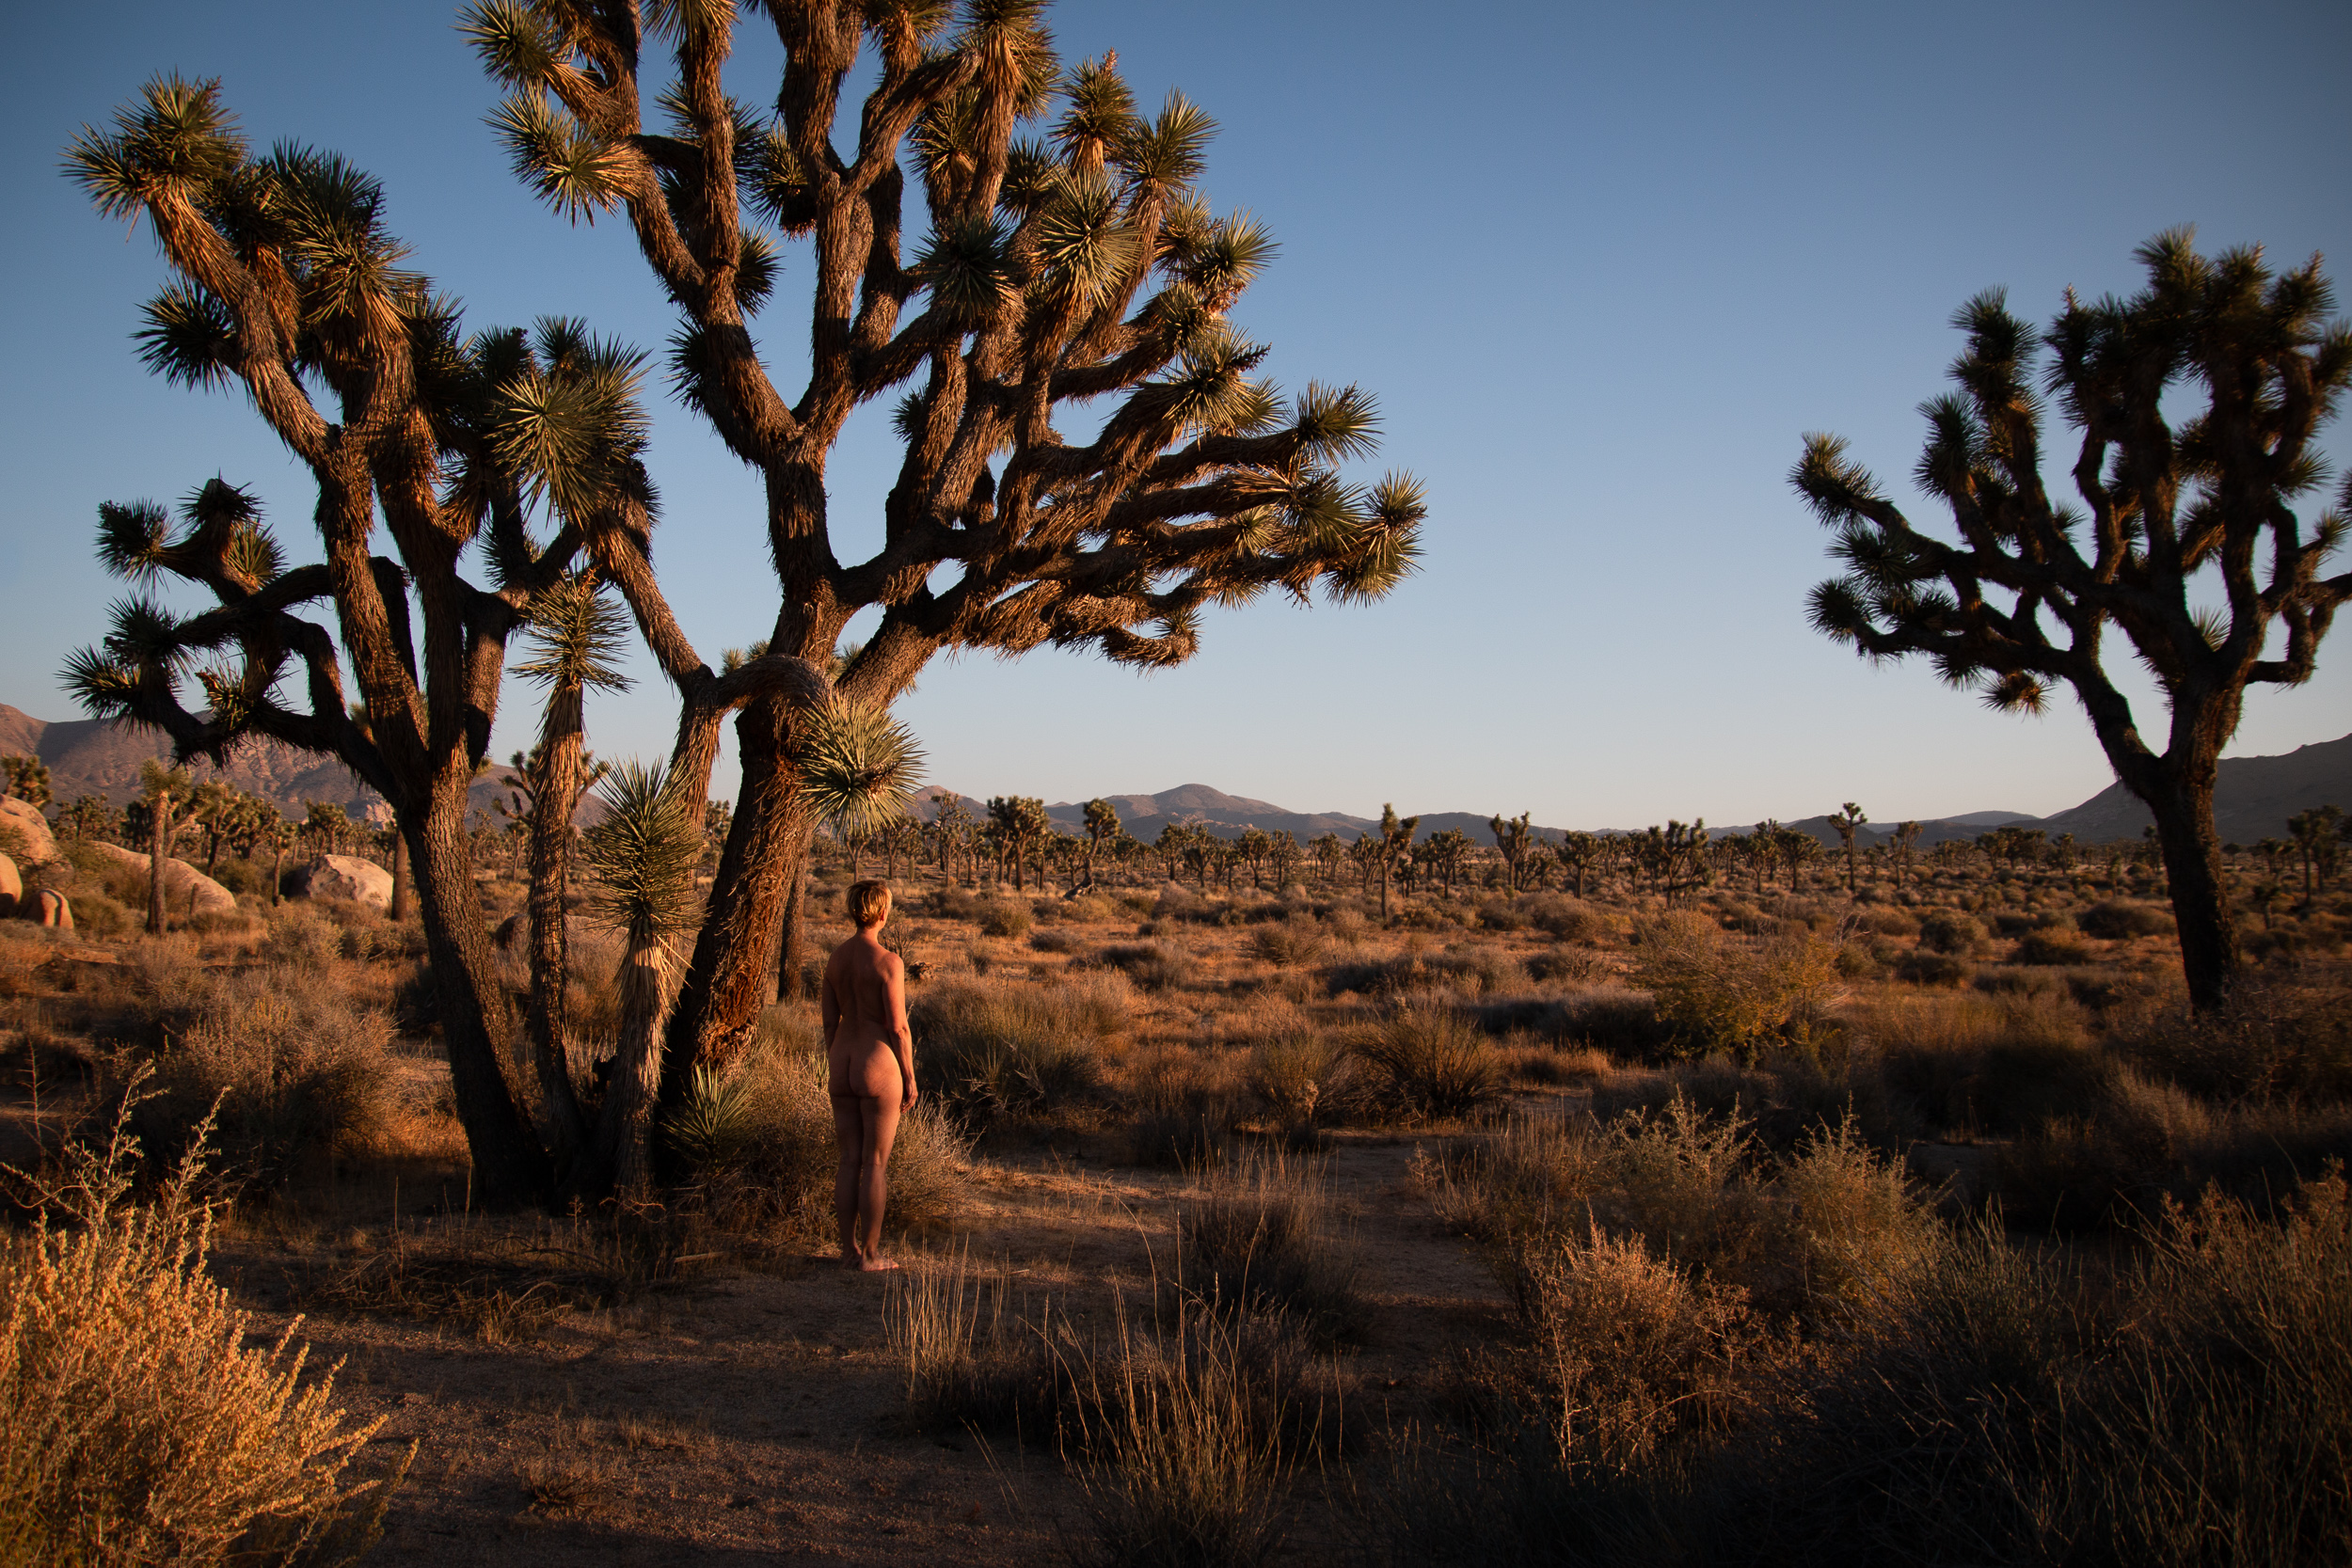 A nude woman stands in the desert by a tree.